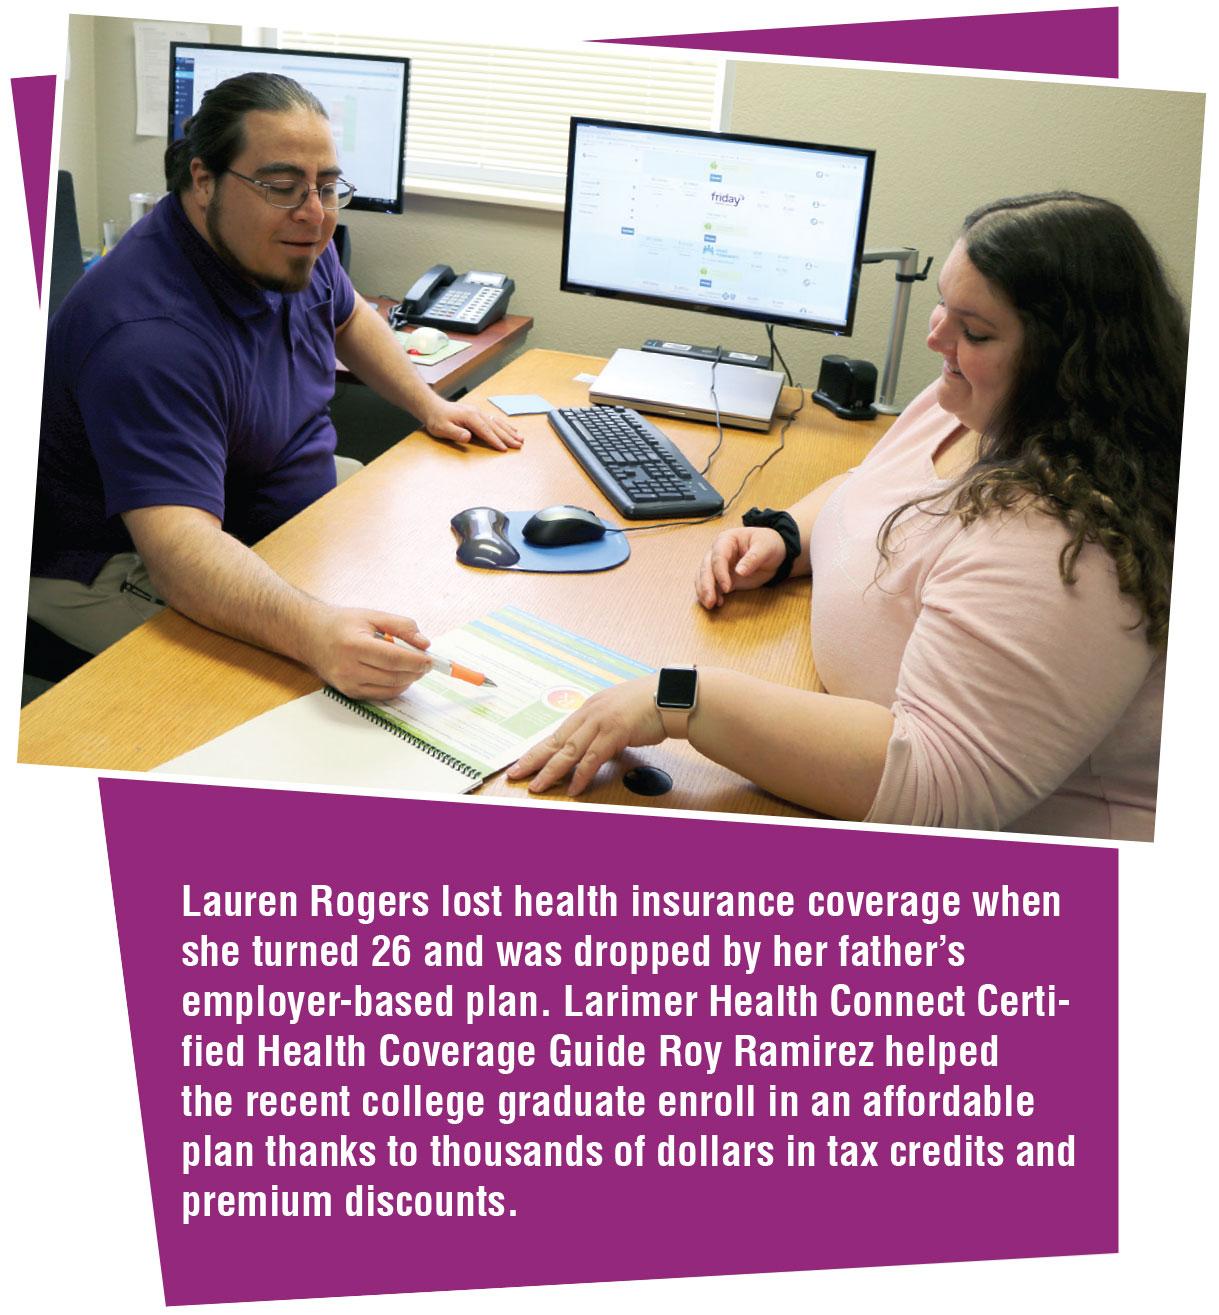 Health Coverage Specialist Roy Ramirez works with Lauren Rogers to find affordable health insurance.